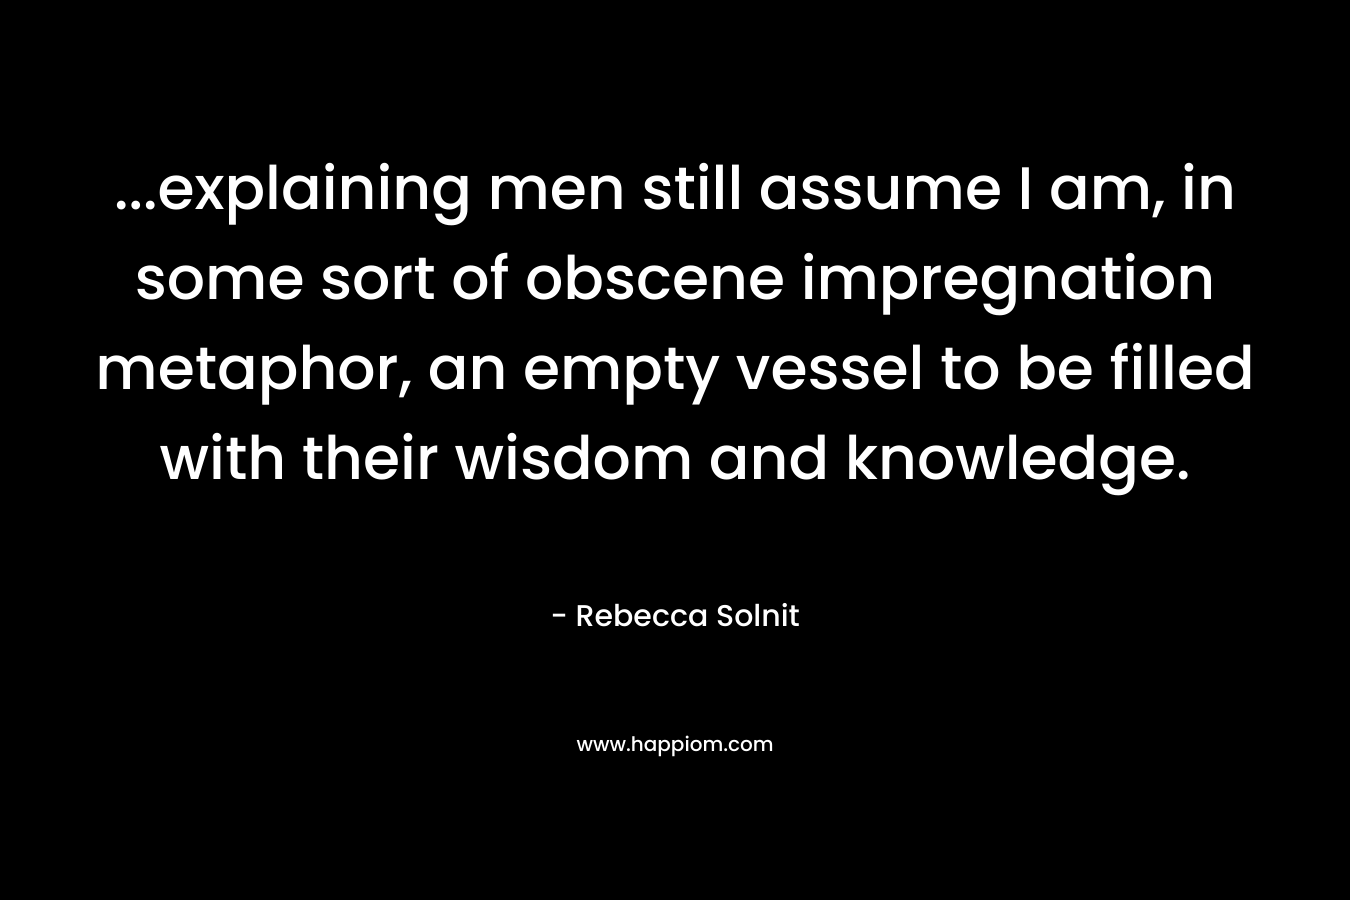 …explaining men still assume I am, in some sort of obscene impregnation metaphor, an empty vessel to be filled with their wisdom and knowledge. – Rebecca Solnit